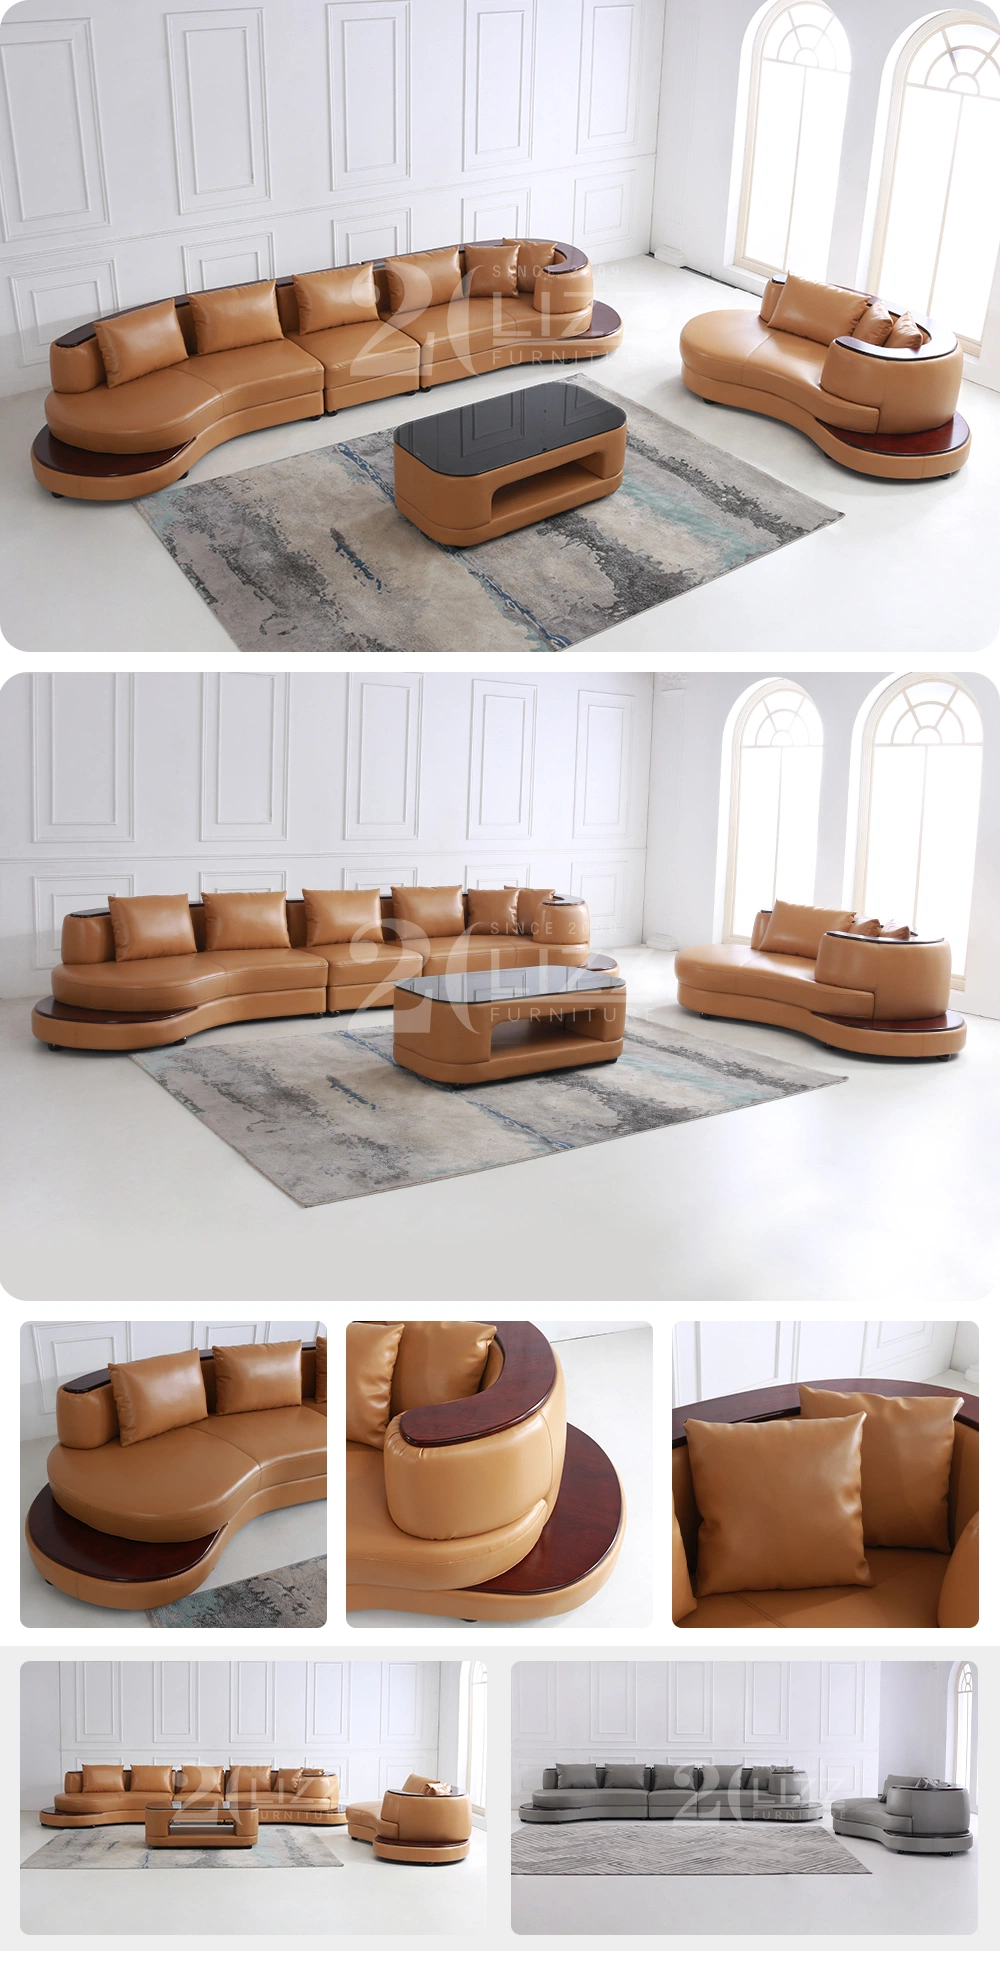 New Modern Office Meeting Room and Home Furniture Genuine Leather Sofa